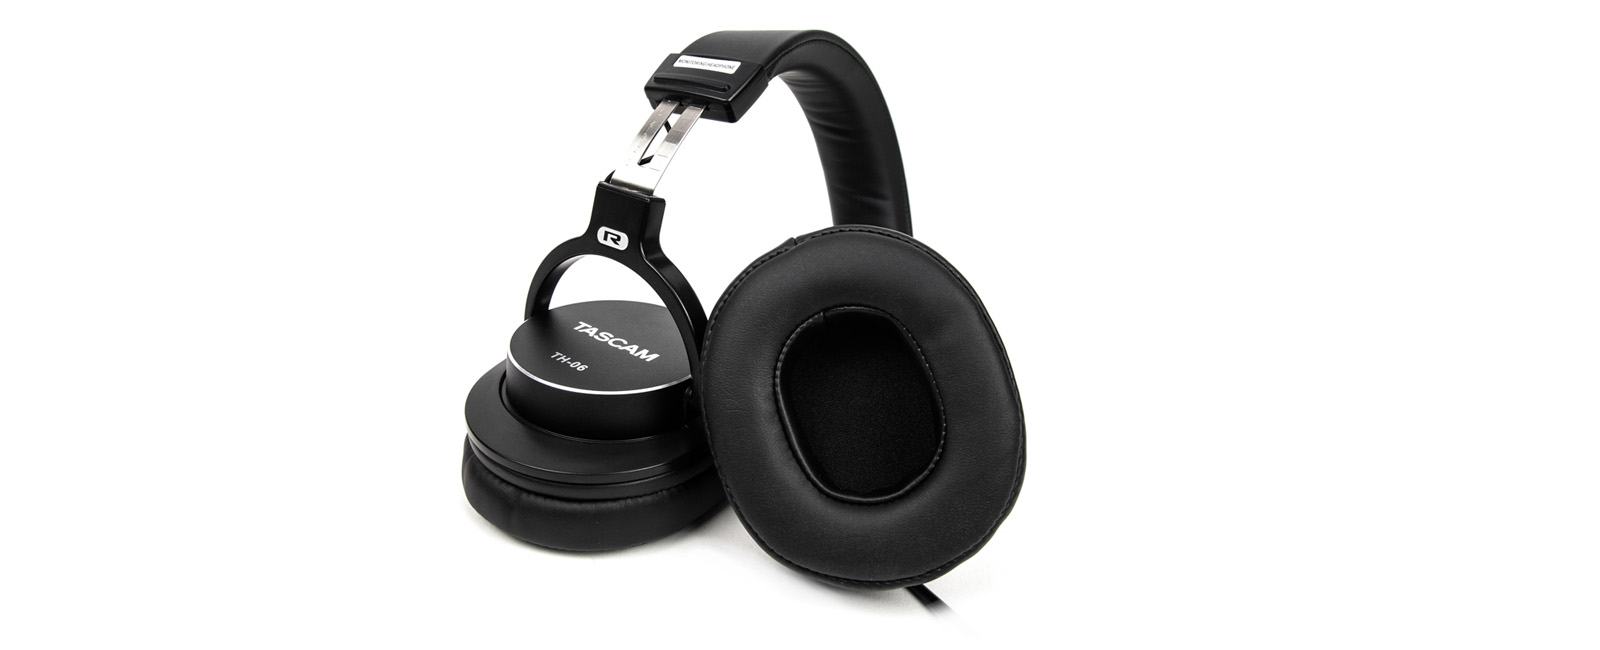 New TASCAM TH-06 Bass XL Monitoring Headphones Deliver Exceptional Bass